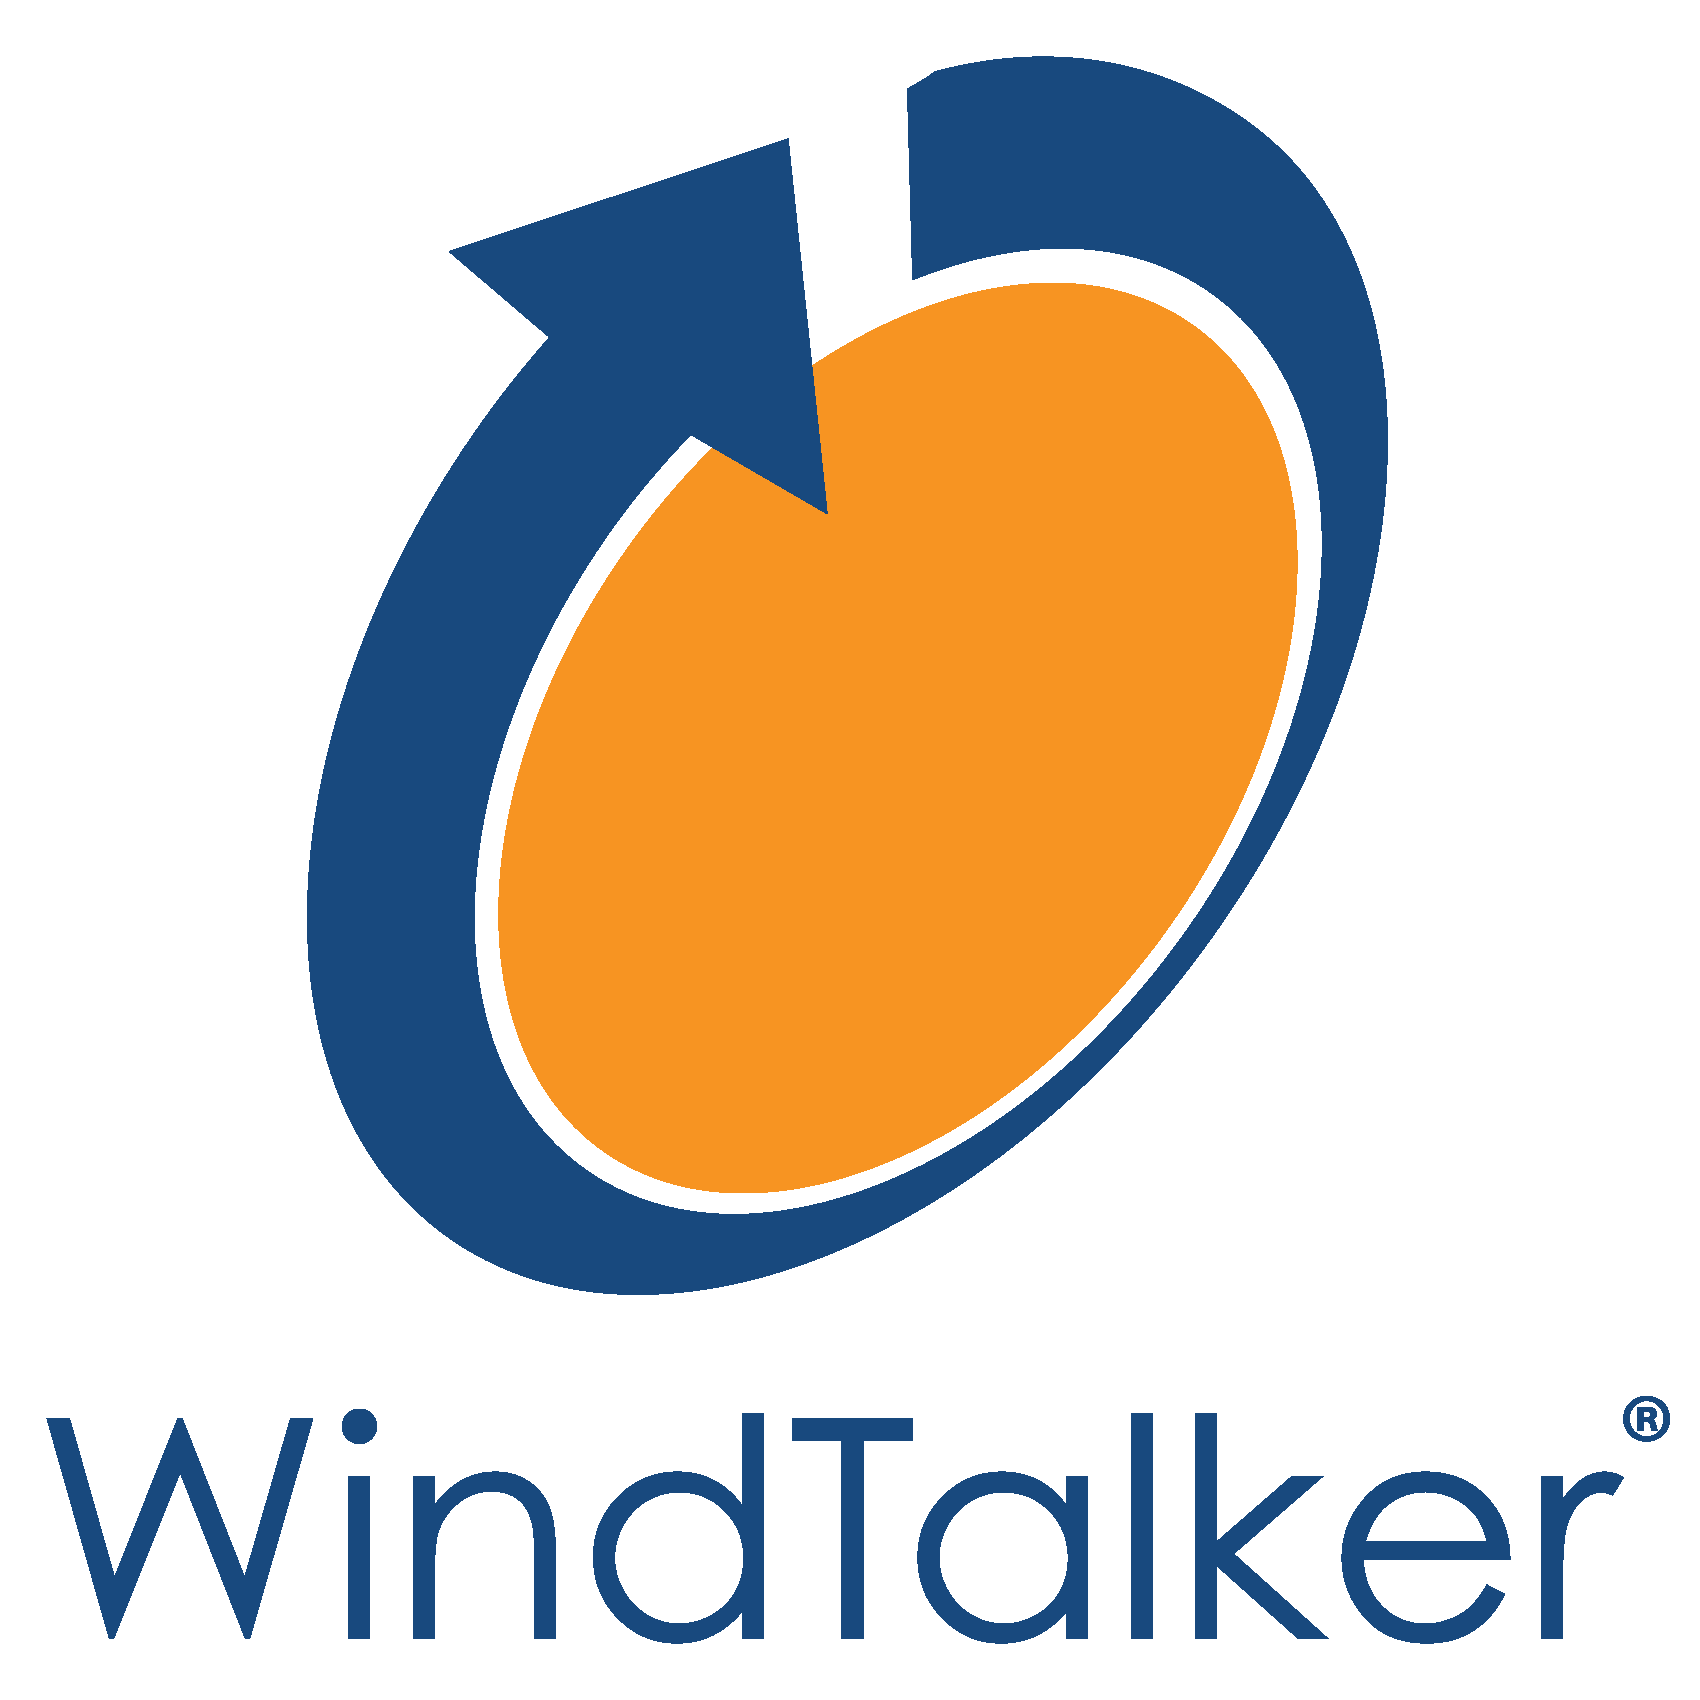 Law Firm Bruno, Colin & Lowe (BCL) Installs WindTalker Content Security Software to Enforce Confidentiality, Redact, Control and Track Clients’ Sensitive Information